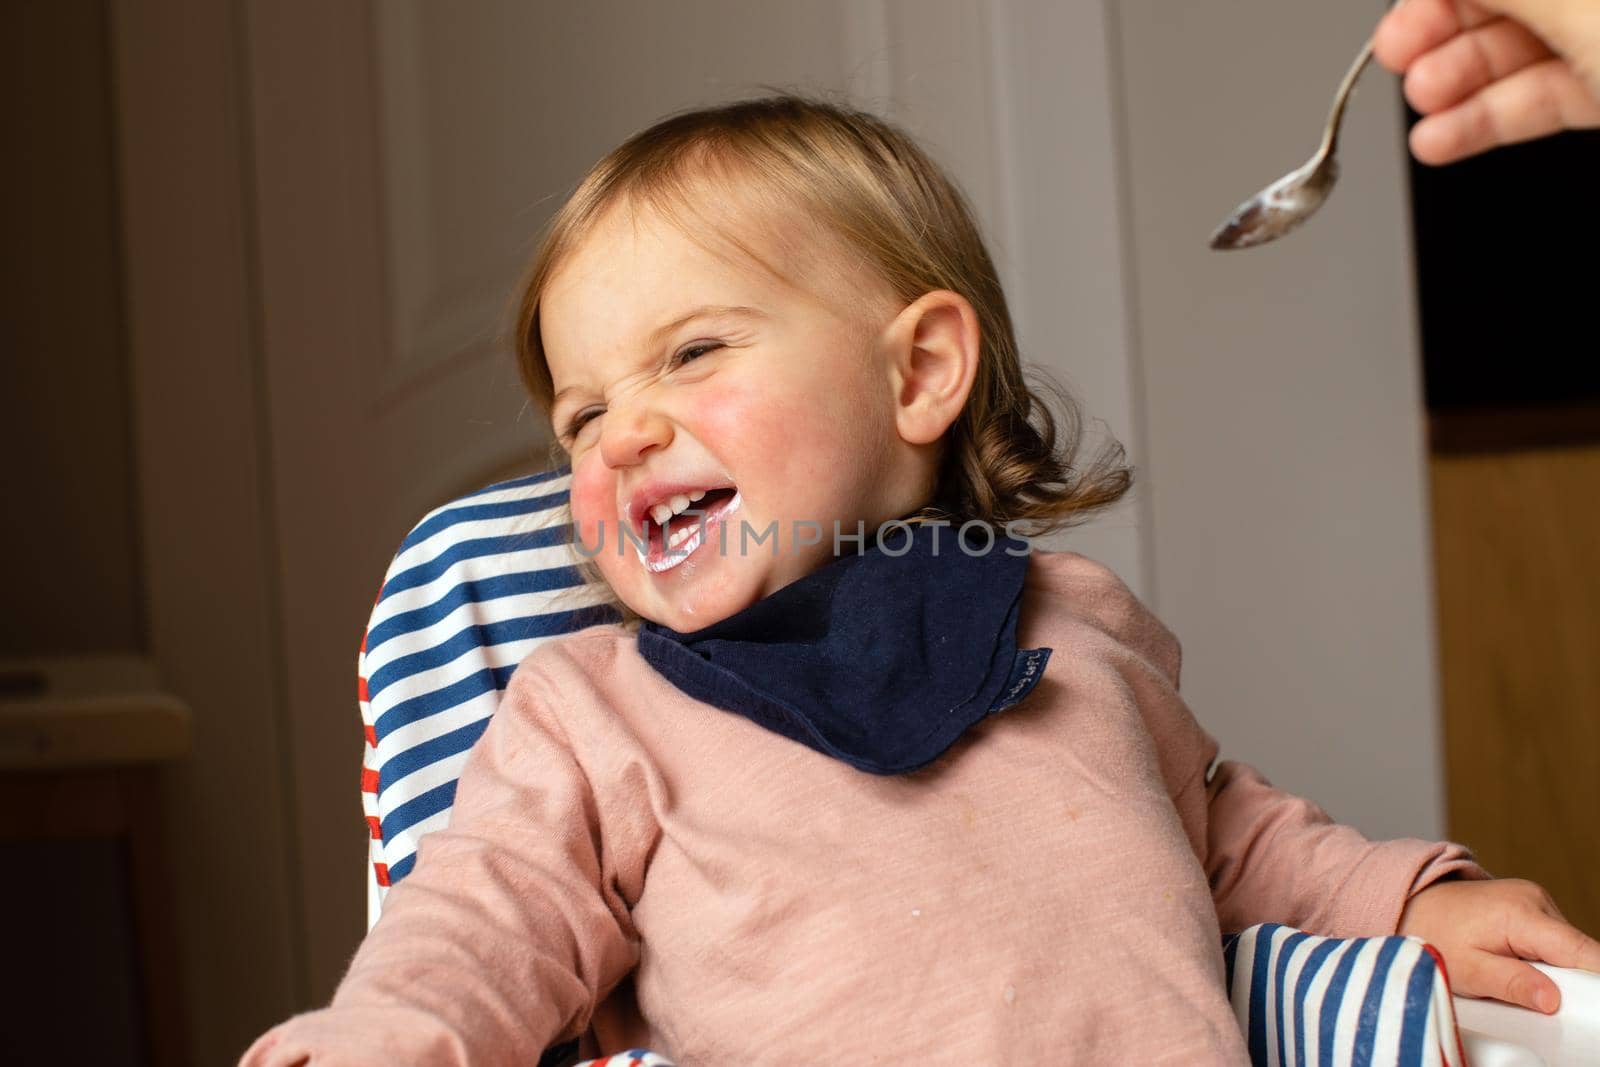 Adorable child smiling and grimacing tossing head in high chair while crop person feeding with spoon in room